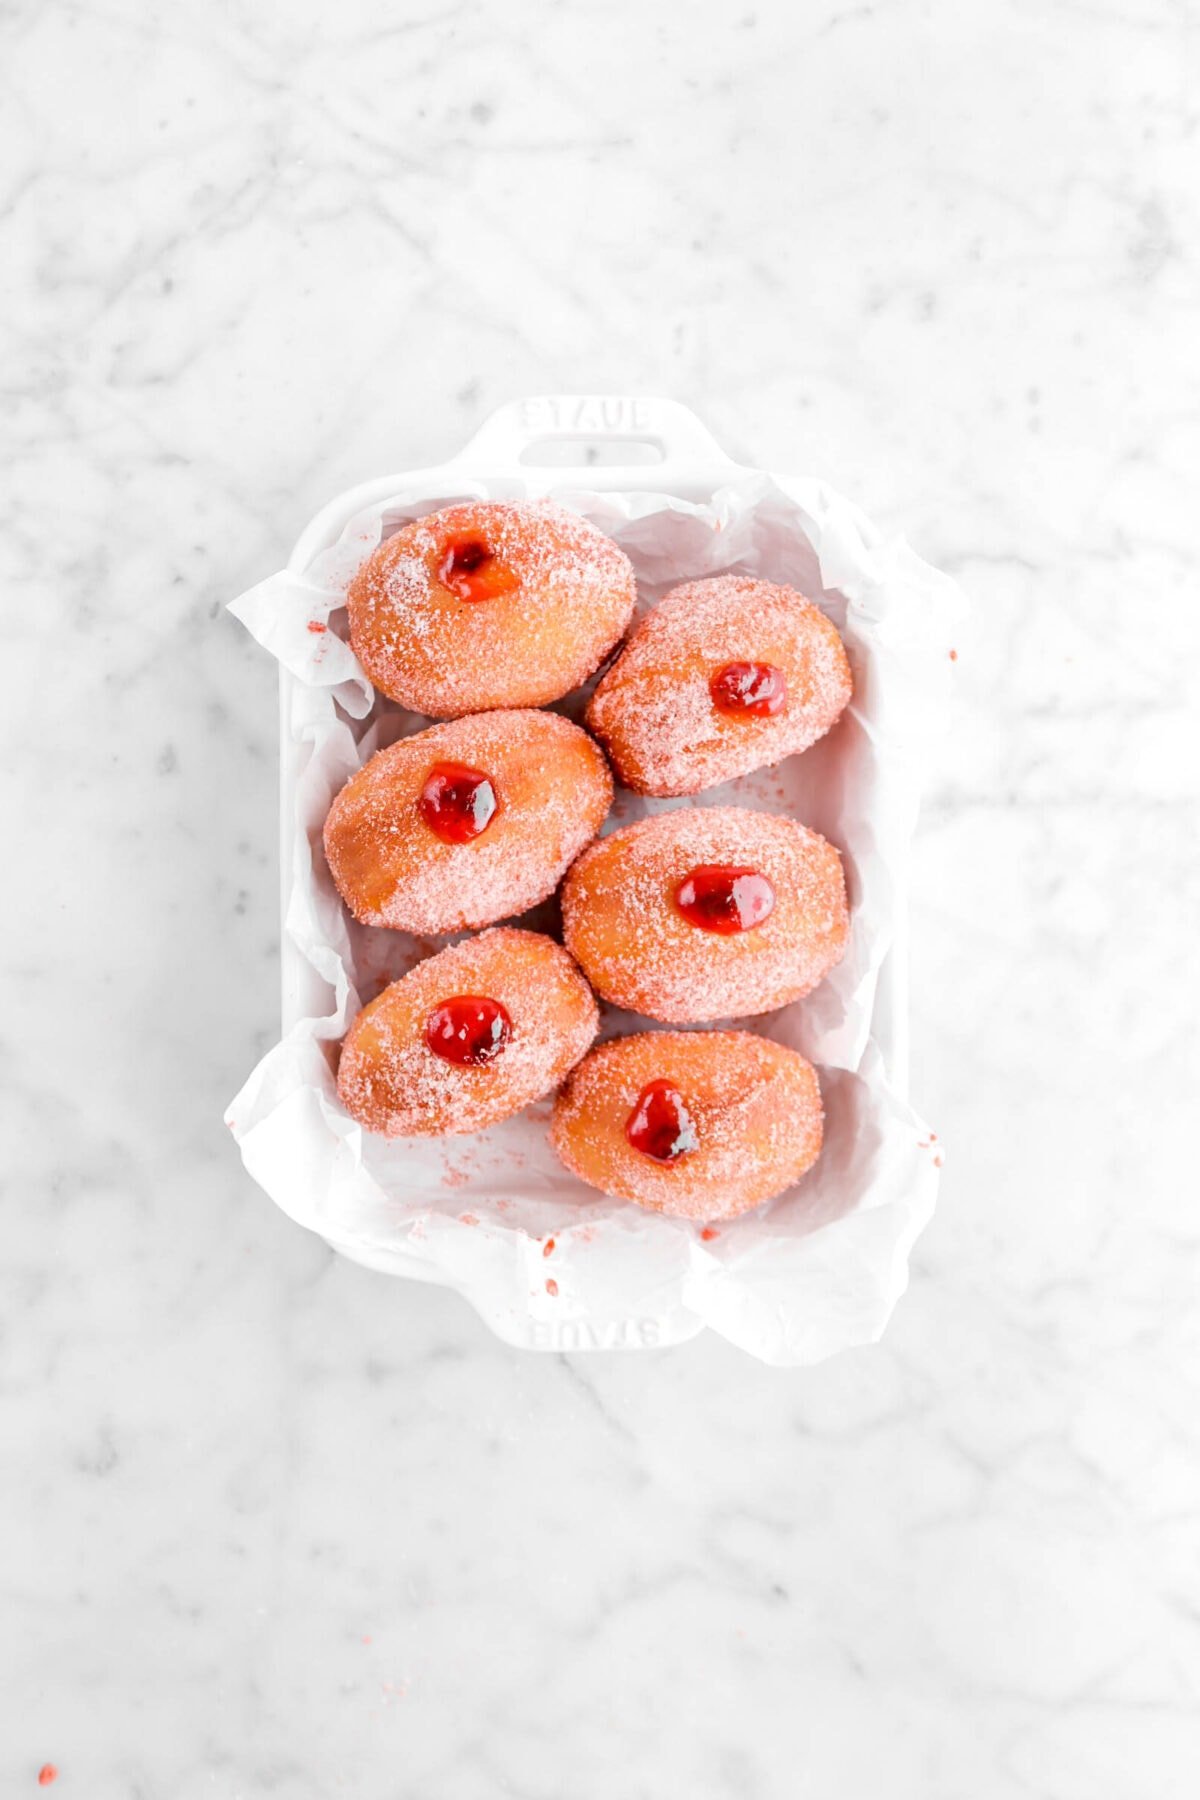 six sugar coated doughnuts filled with jam in small white casserole